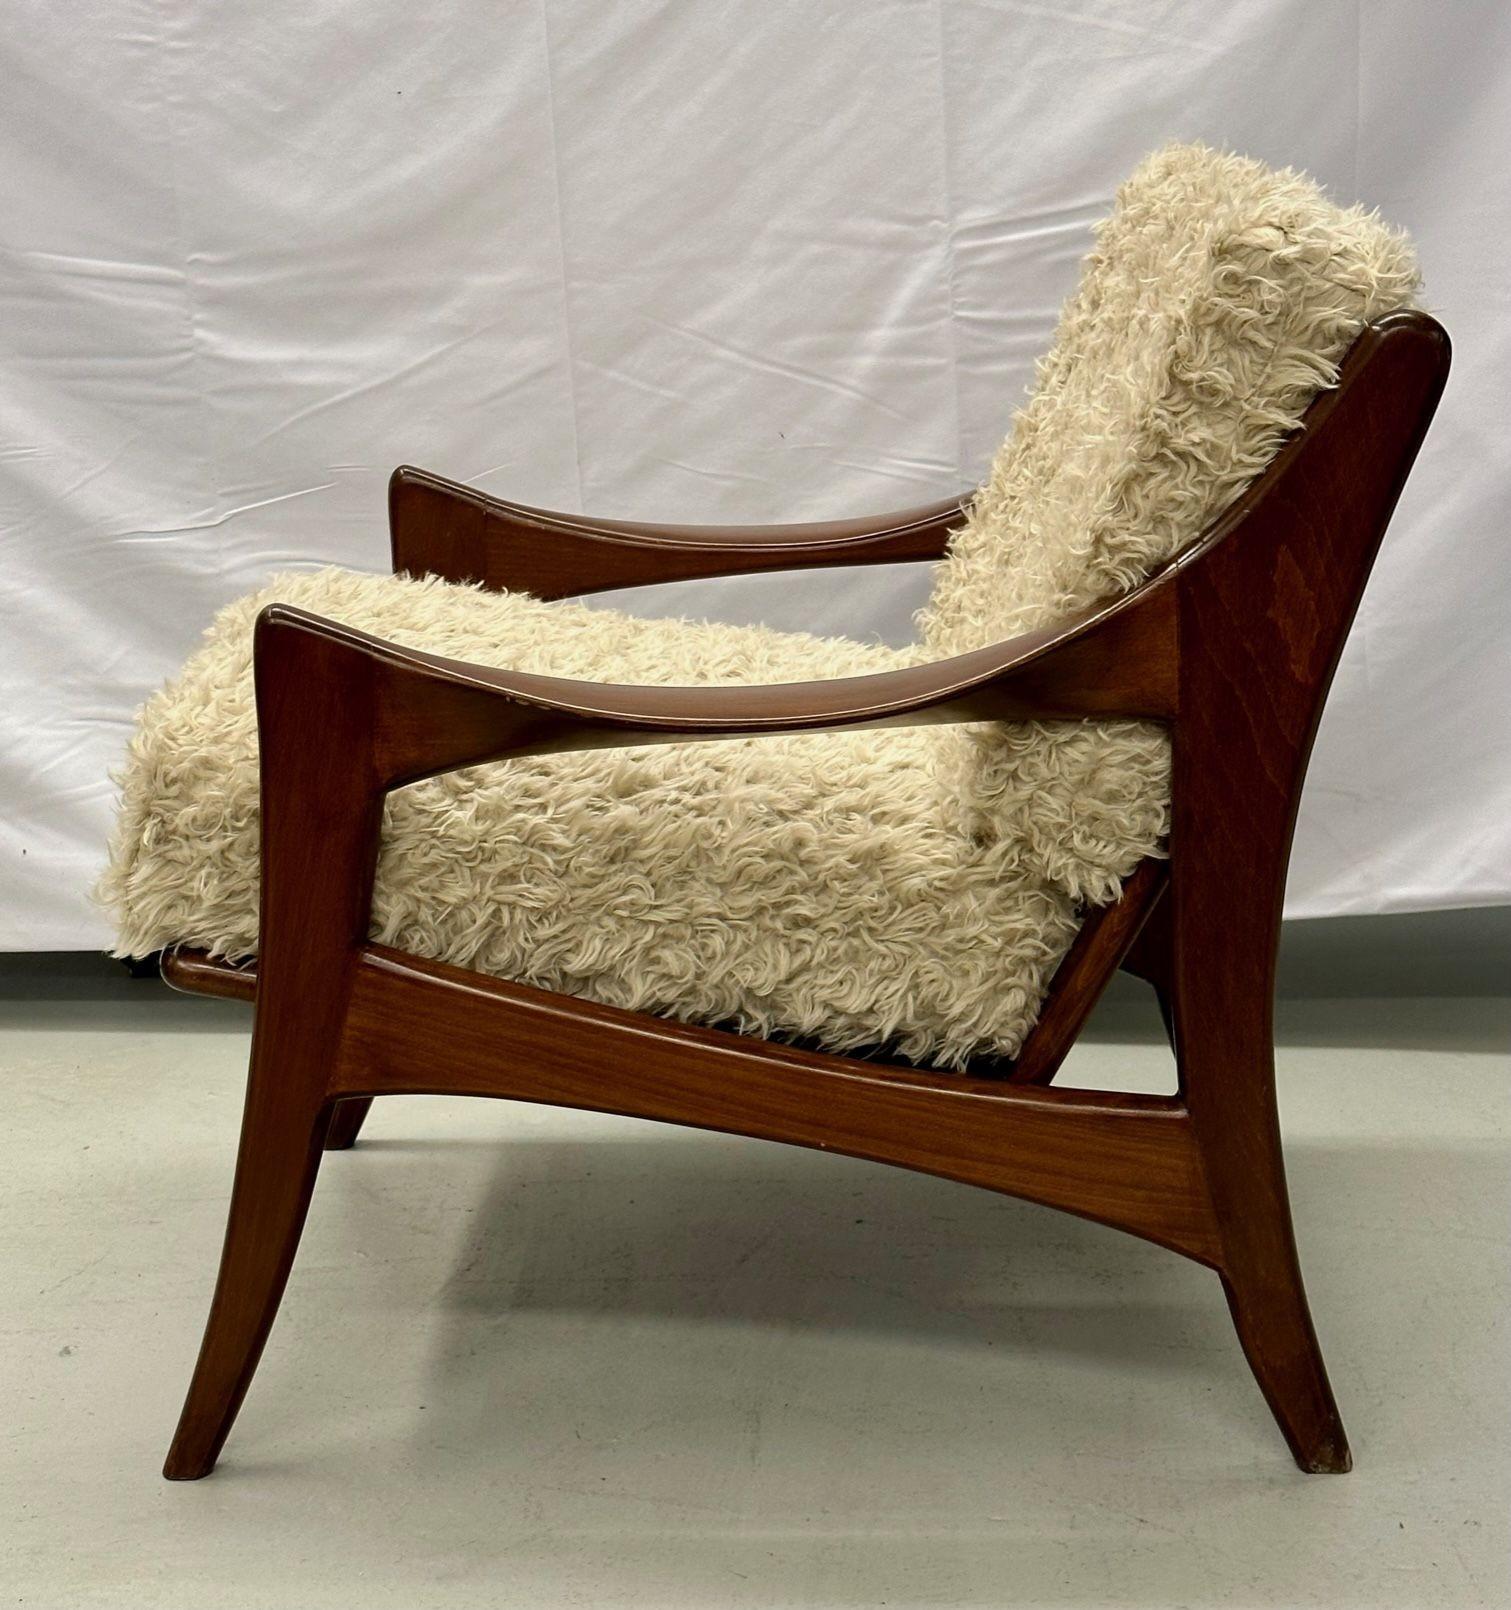 Pair of Dutch Mid-Century Modern Style Arm / Lounge Chairs, Teak, Brass For Sale 3